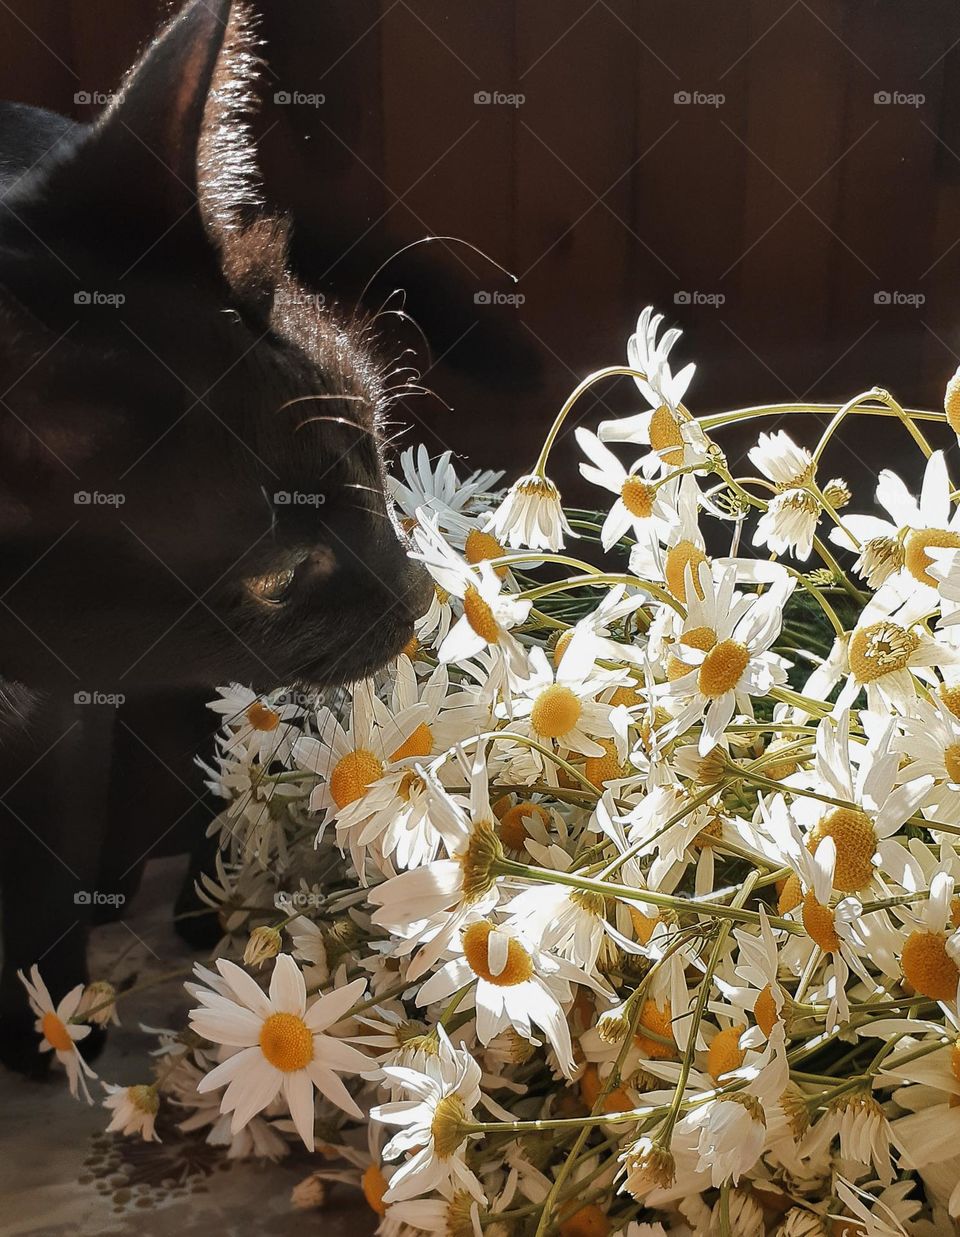 a cat enjoys the smell of field daisies